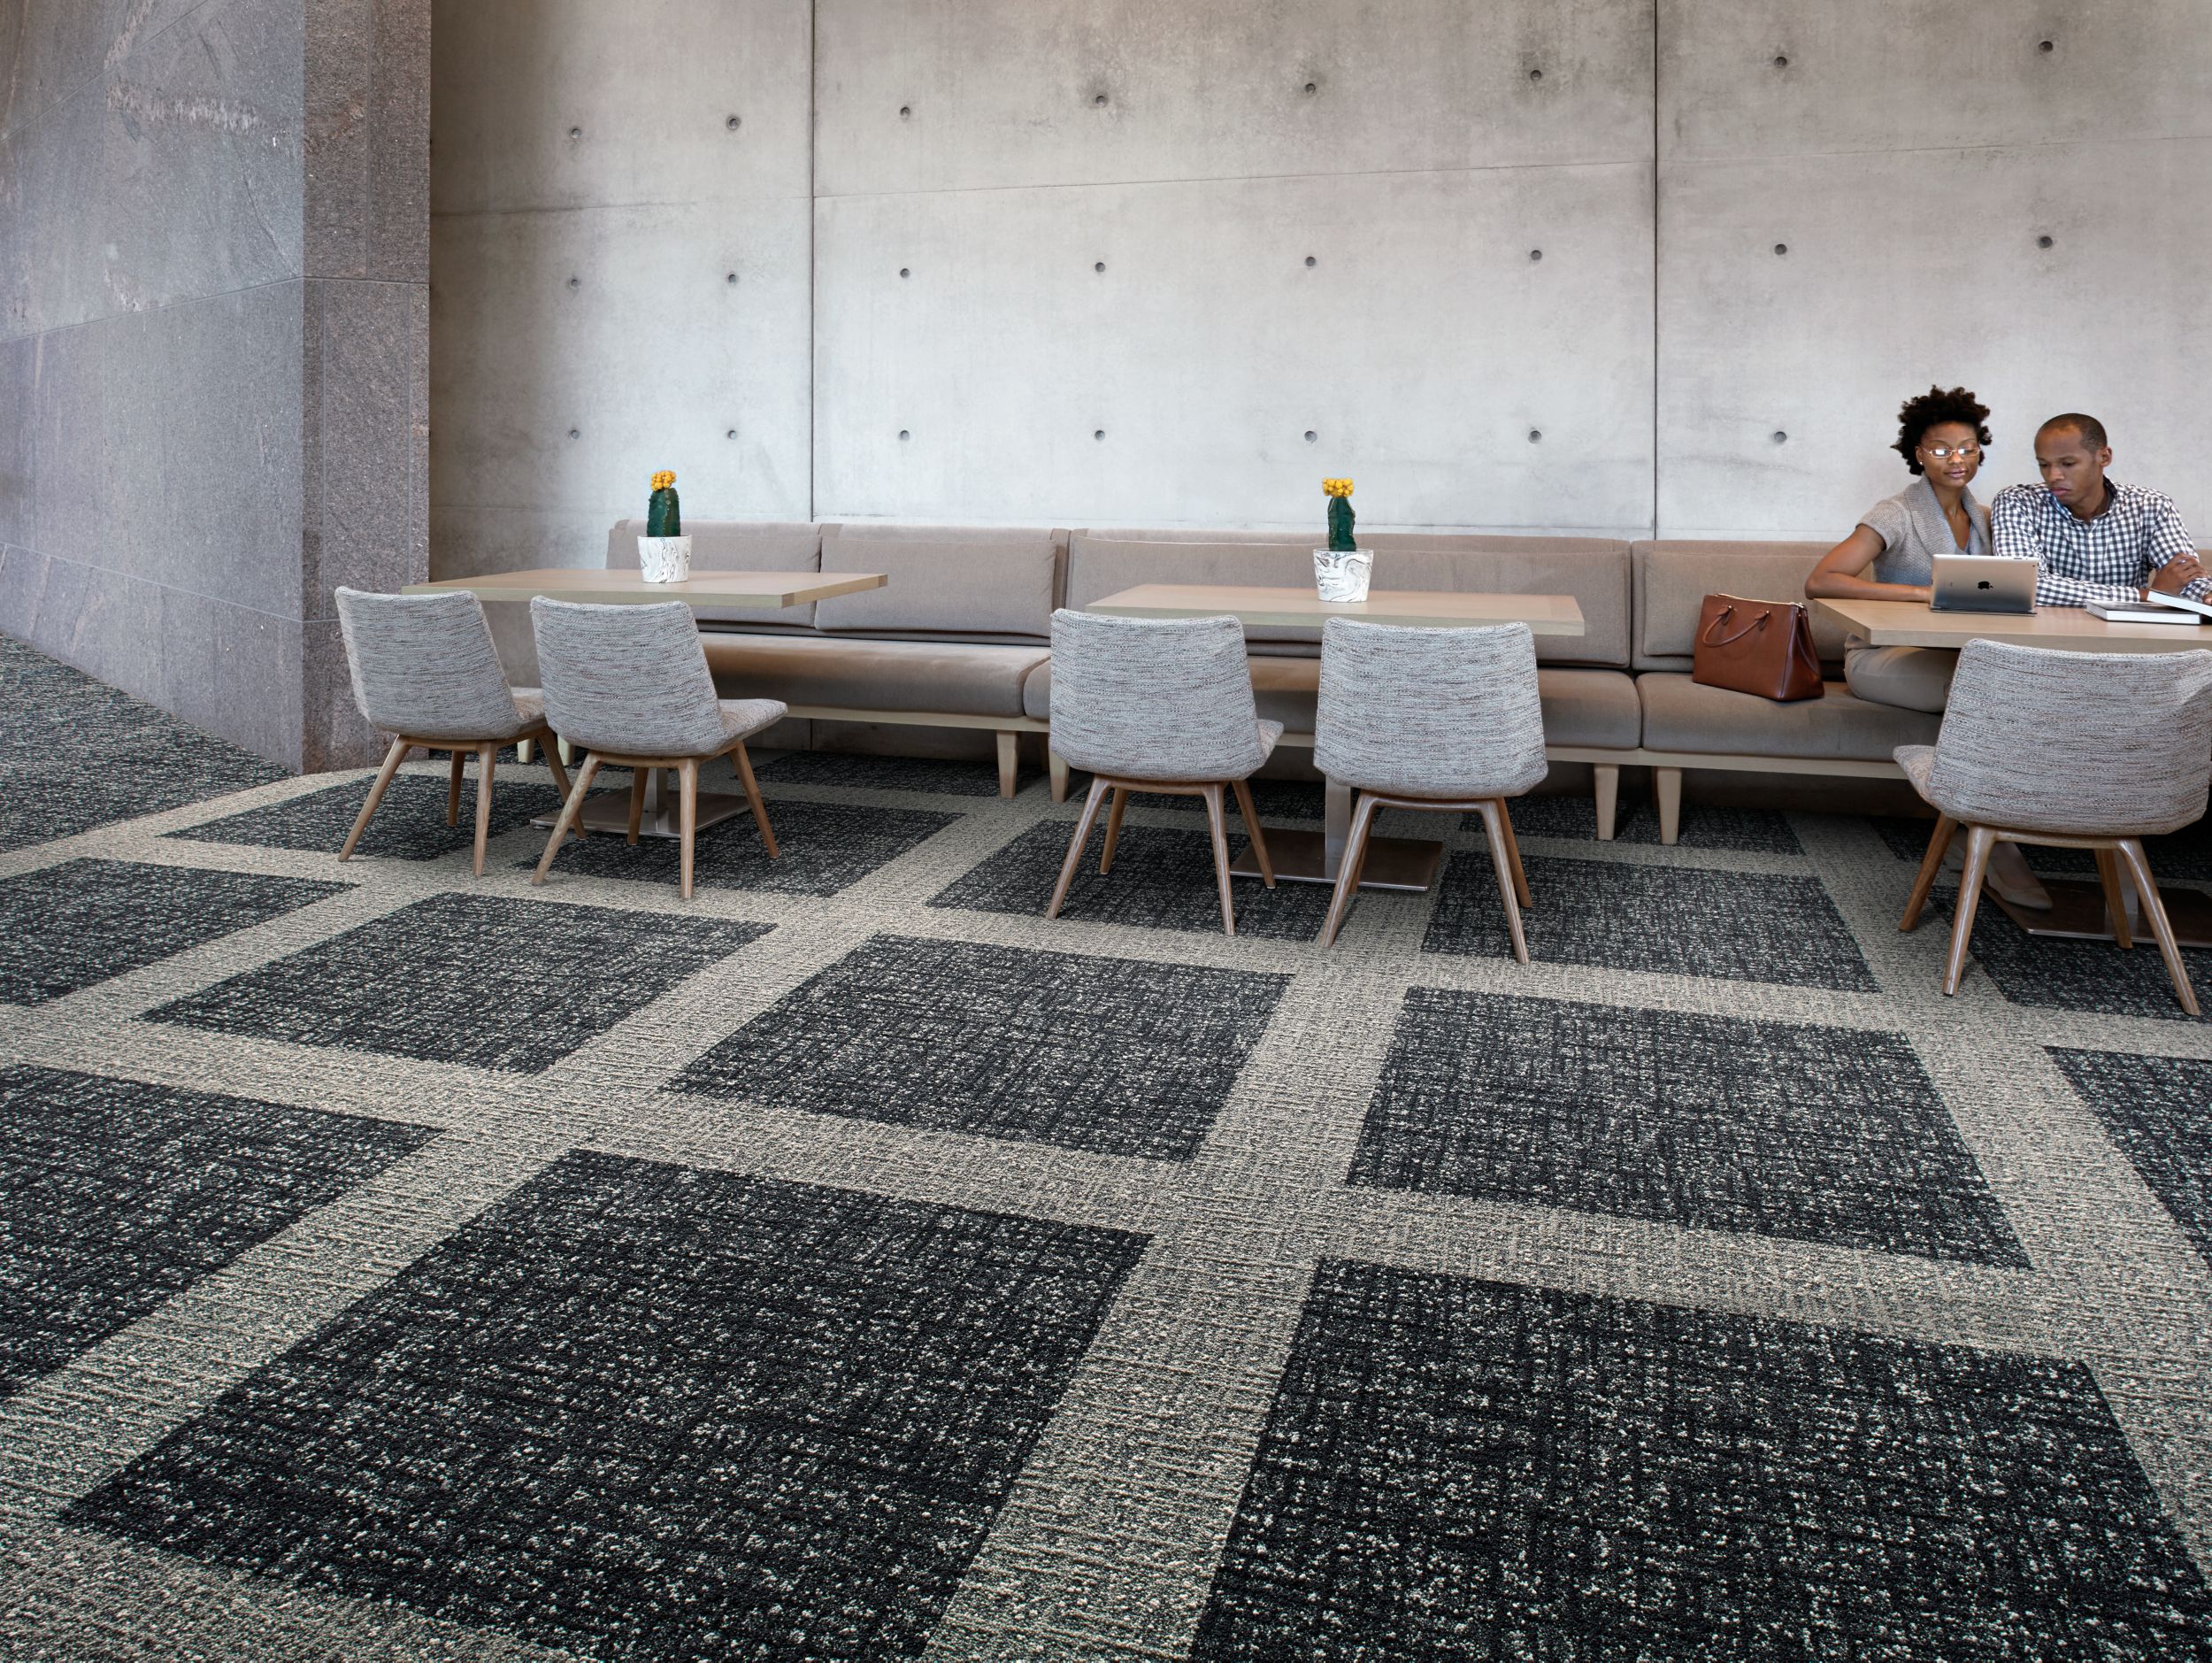 image Interface WW895 plank carpet tile and Textured Woodgrains LVT in office common area with tables and chairs numéro 2